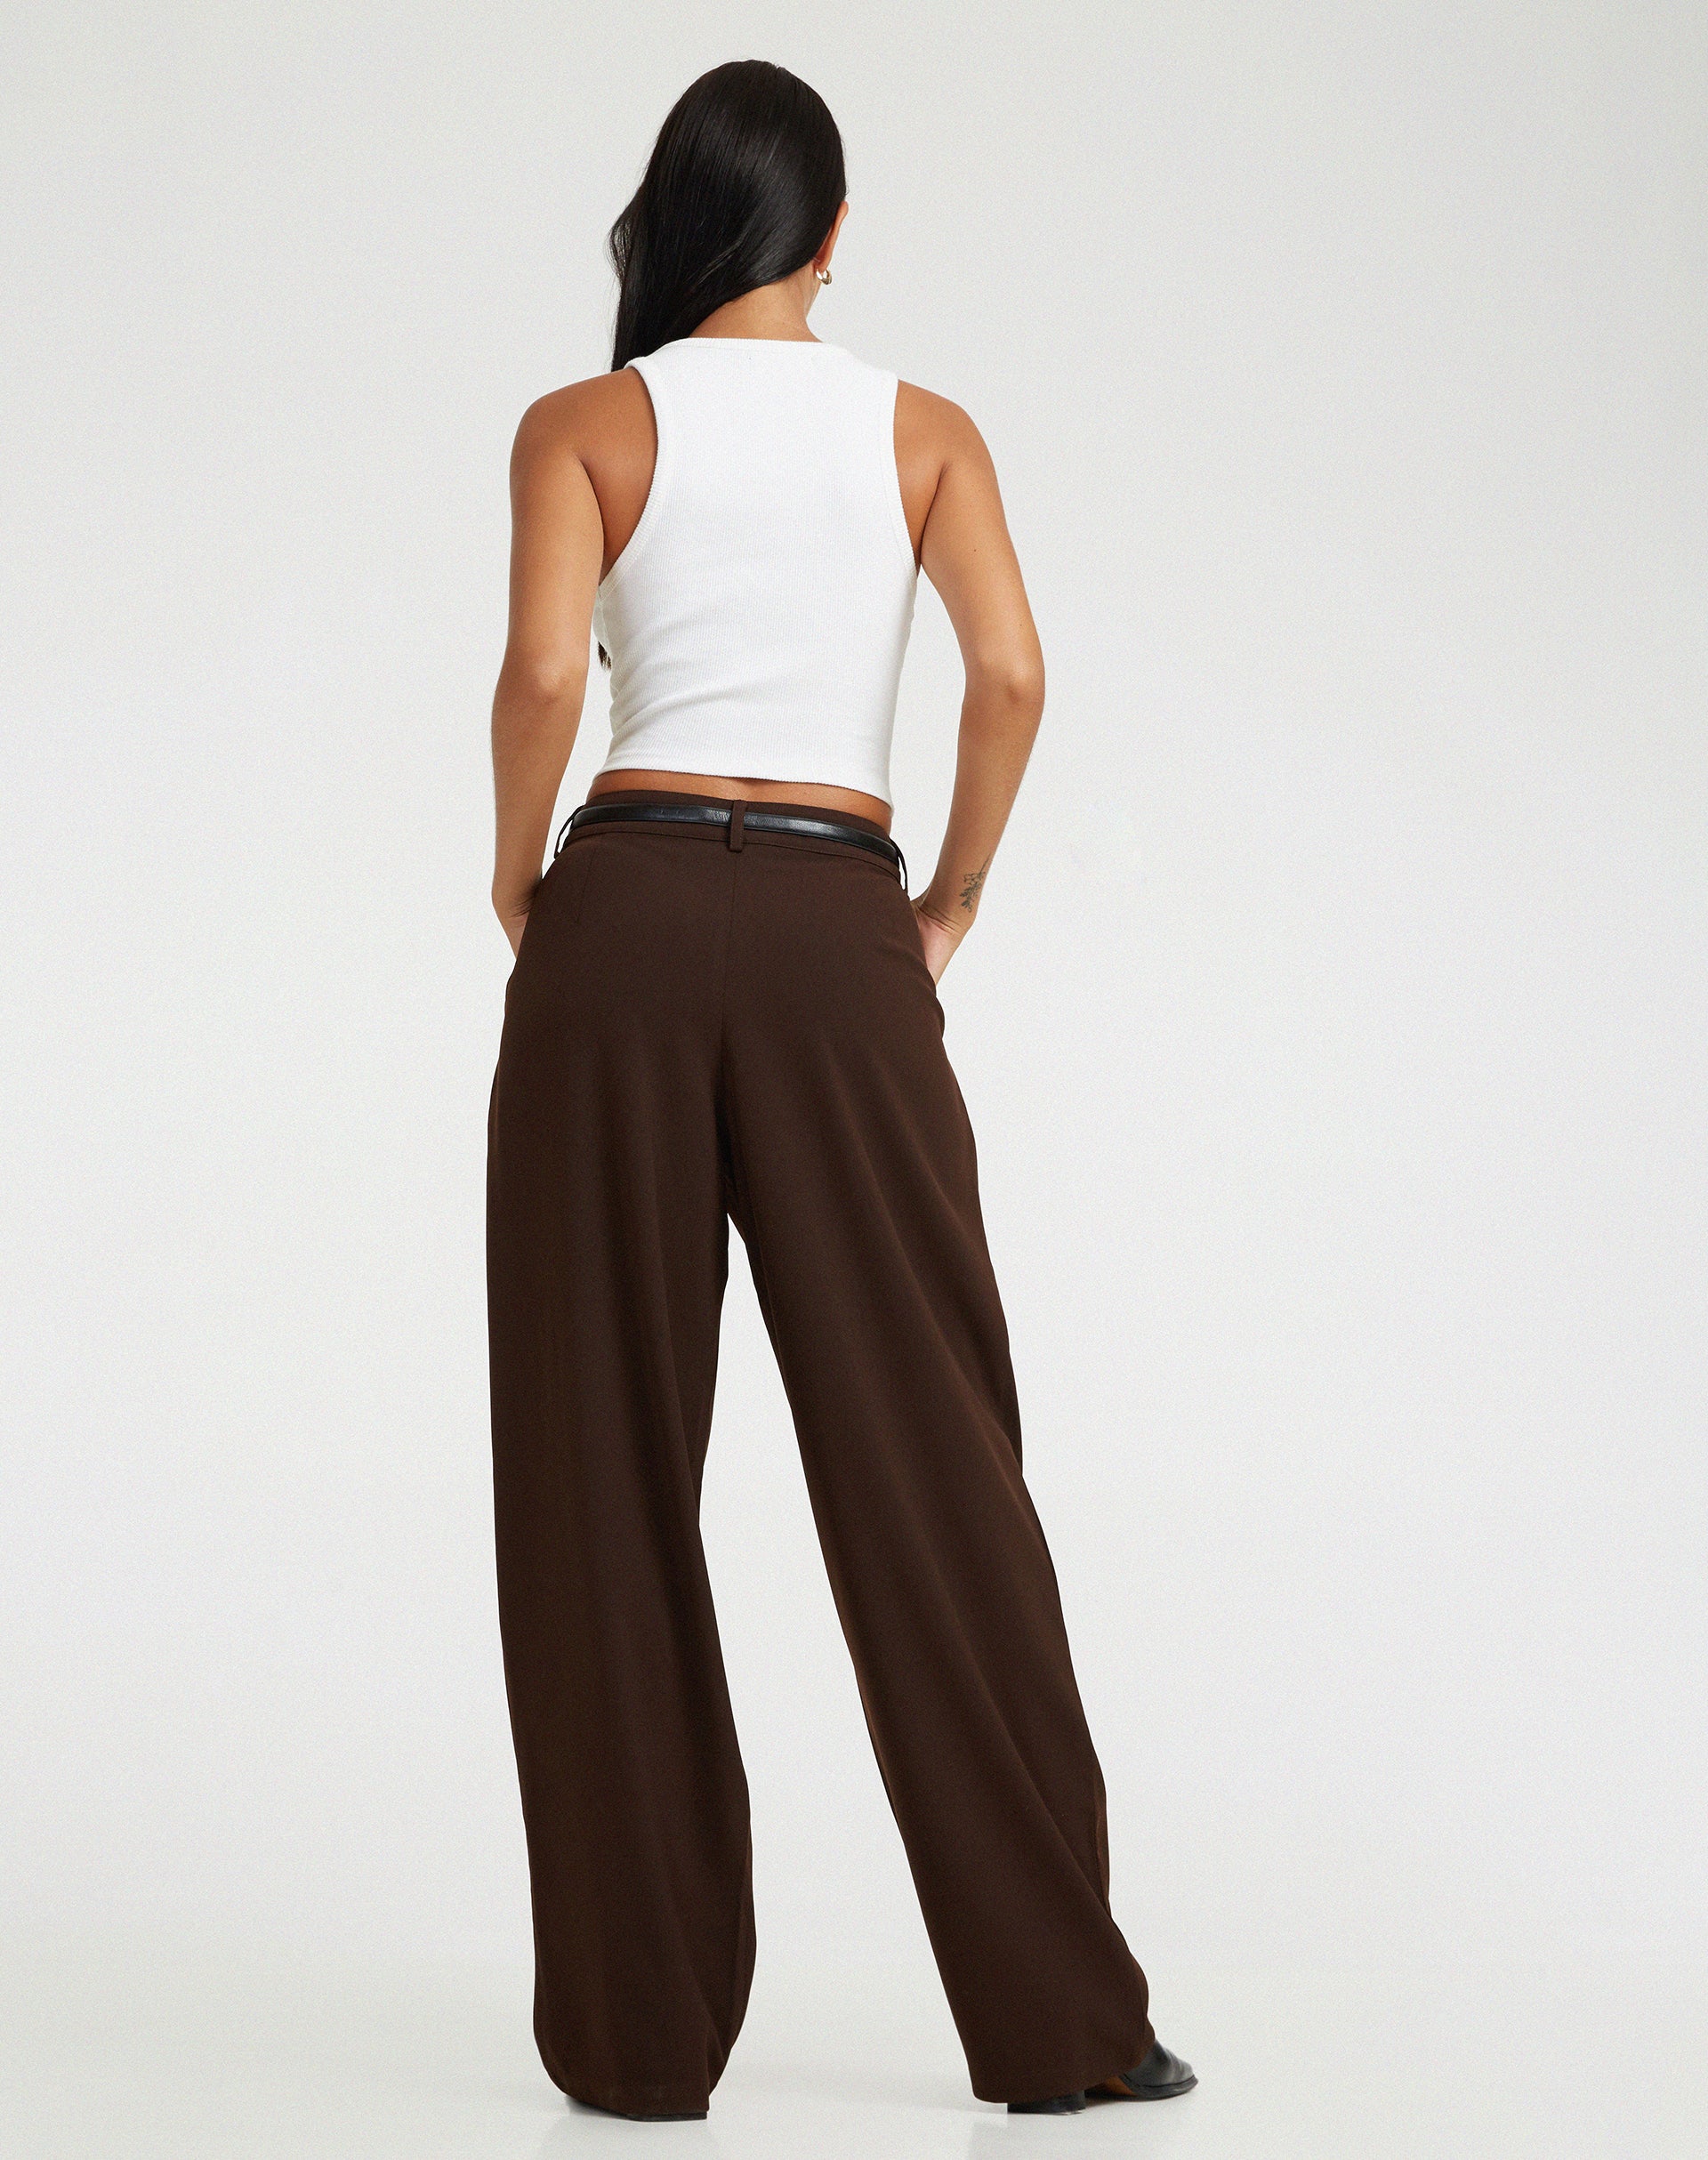 image of Sabara Trouser in Tailoring Cappuccino